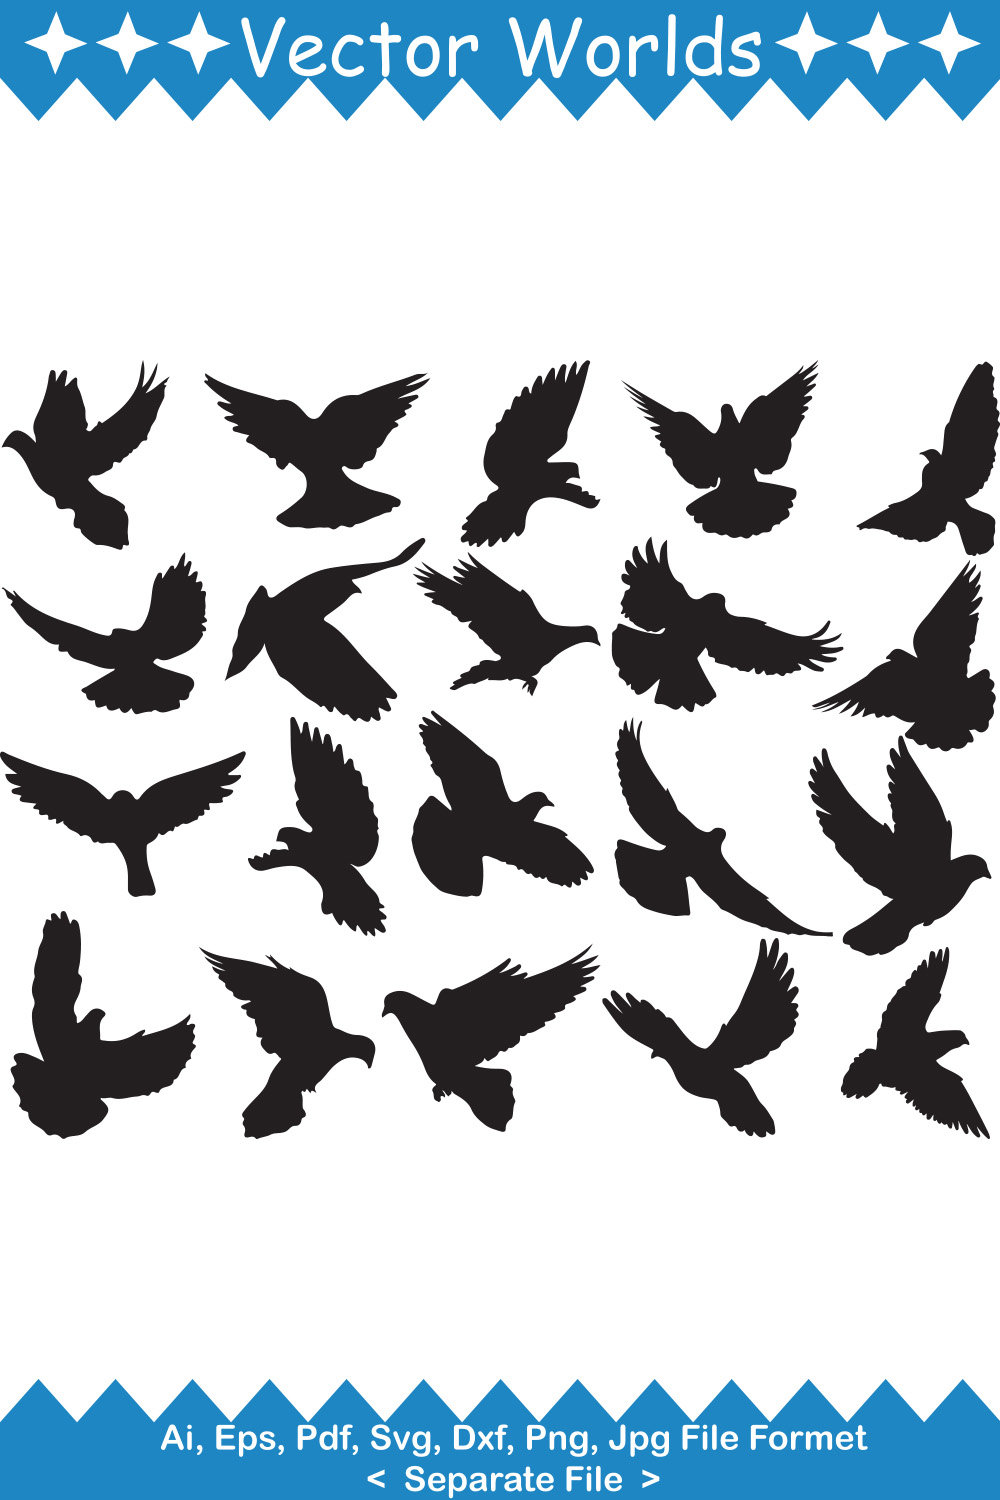 Flock of birds flying over a white background.